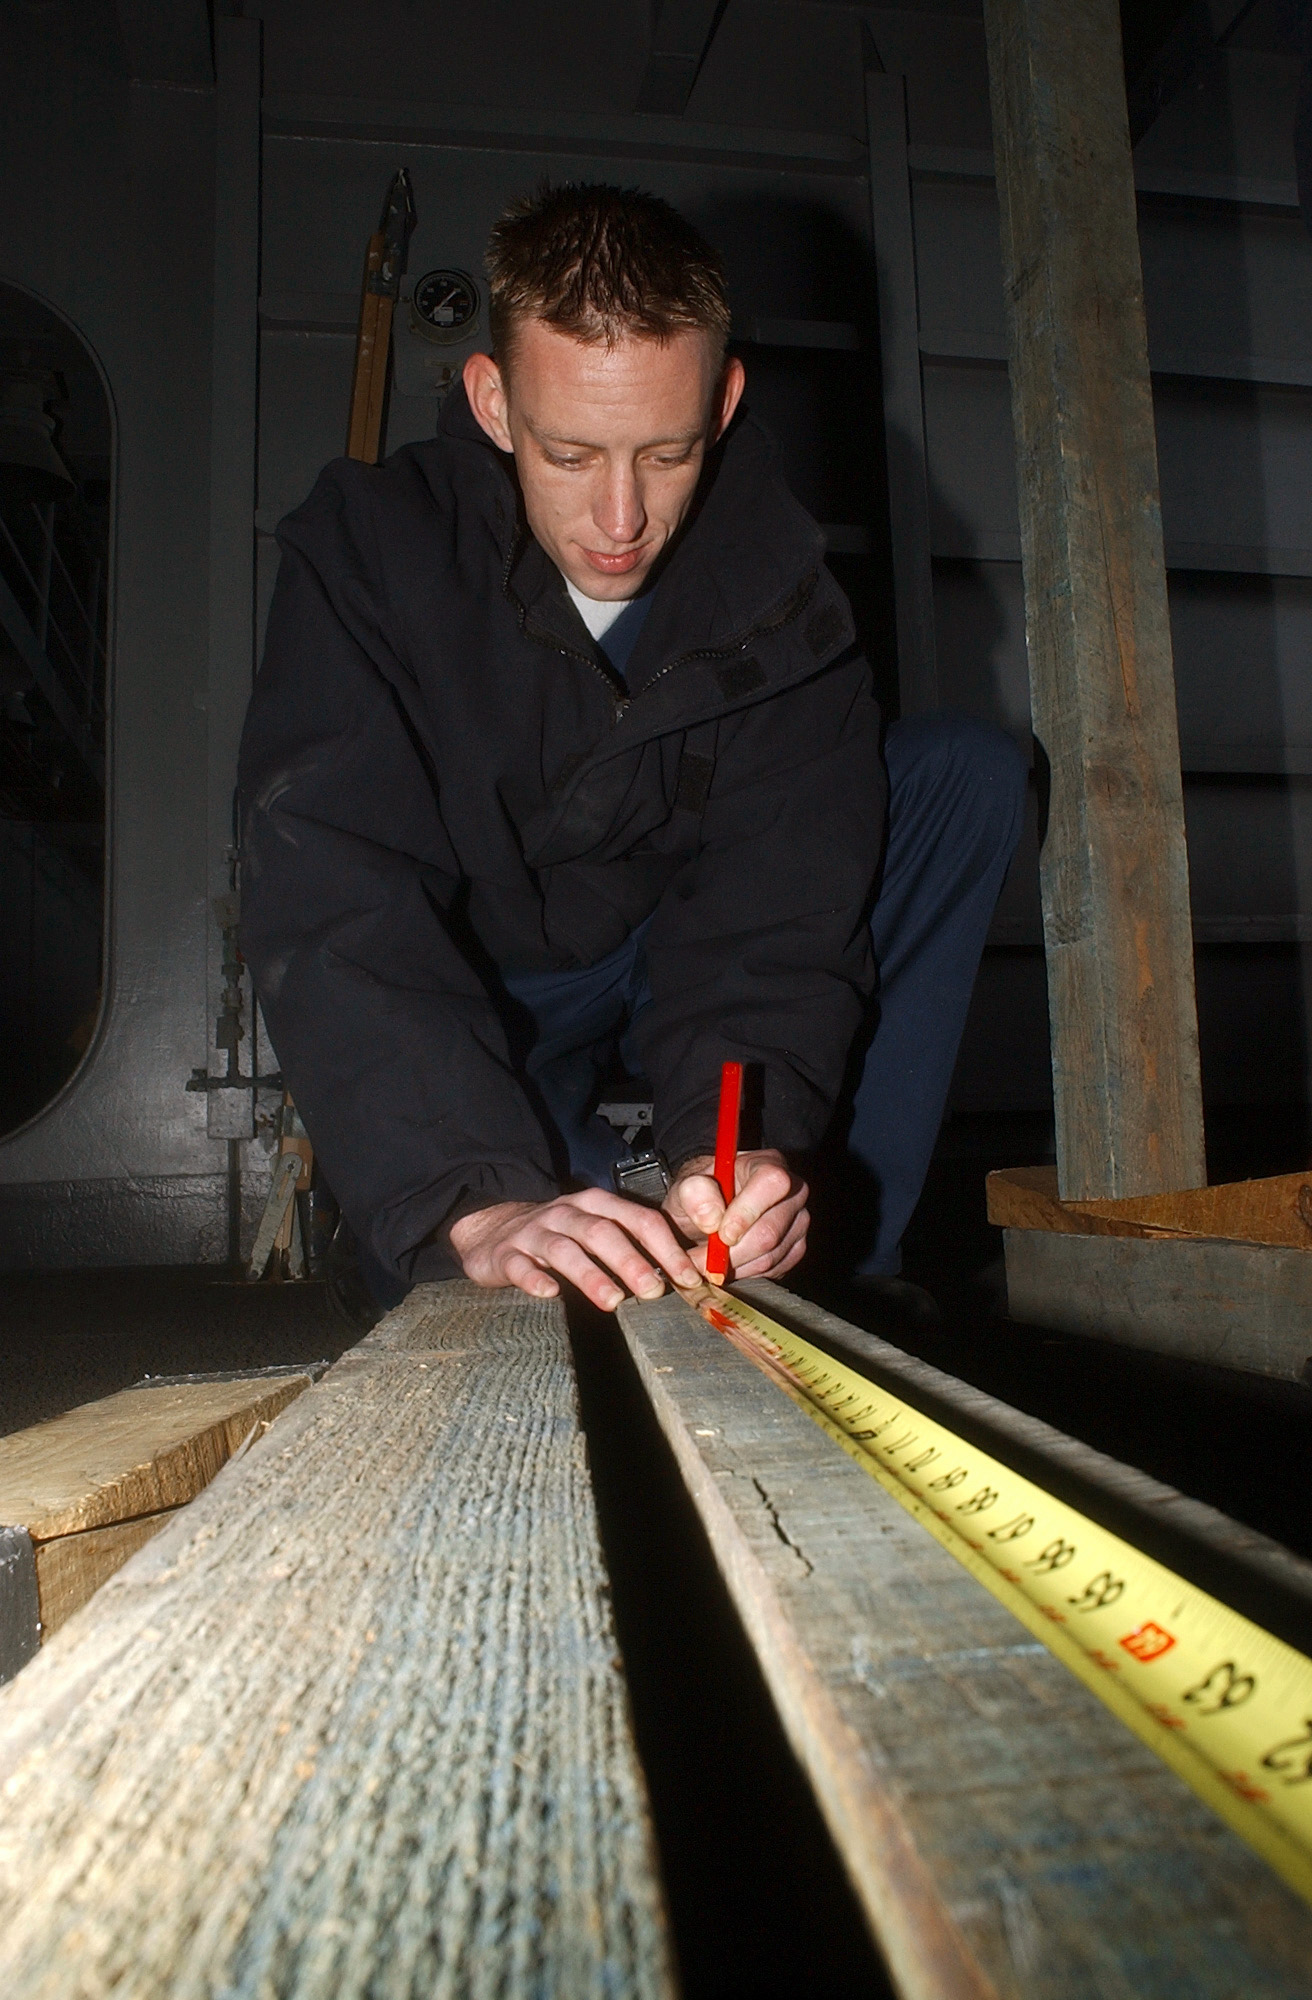 US Navy 050411-N-7405P-038 Damage Controlman 3rd Class Marc Robins measures wood before cutting it